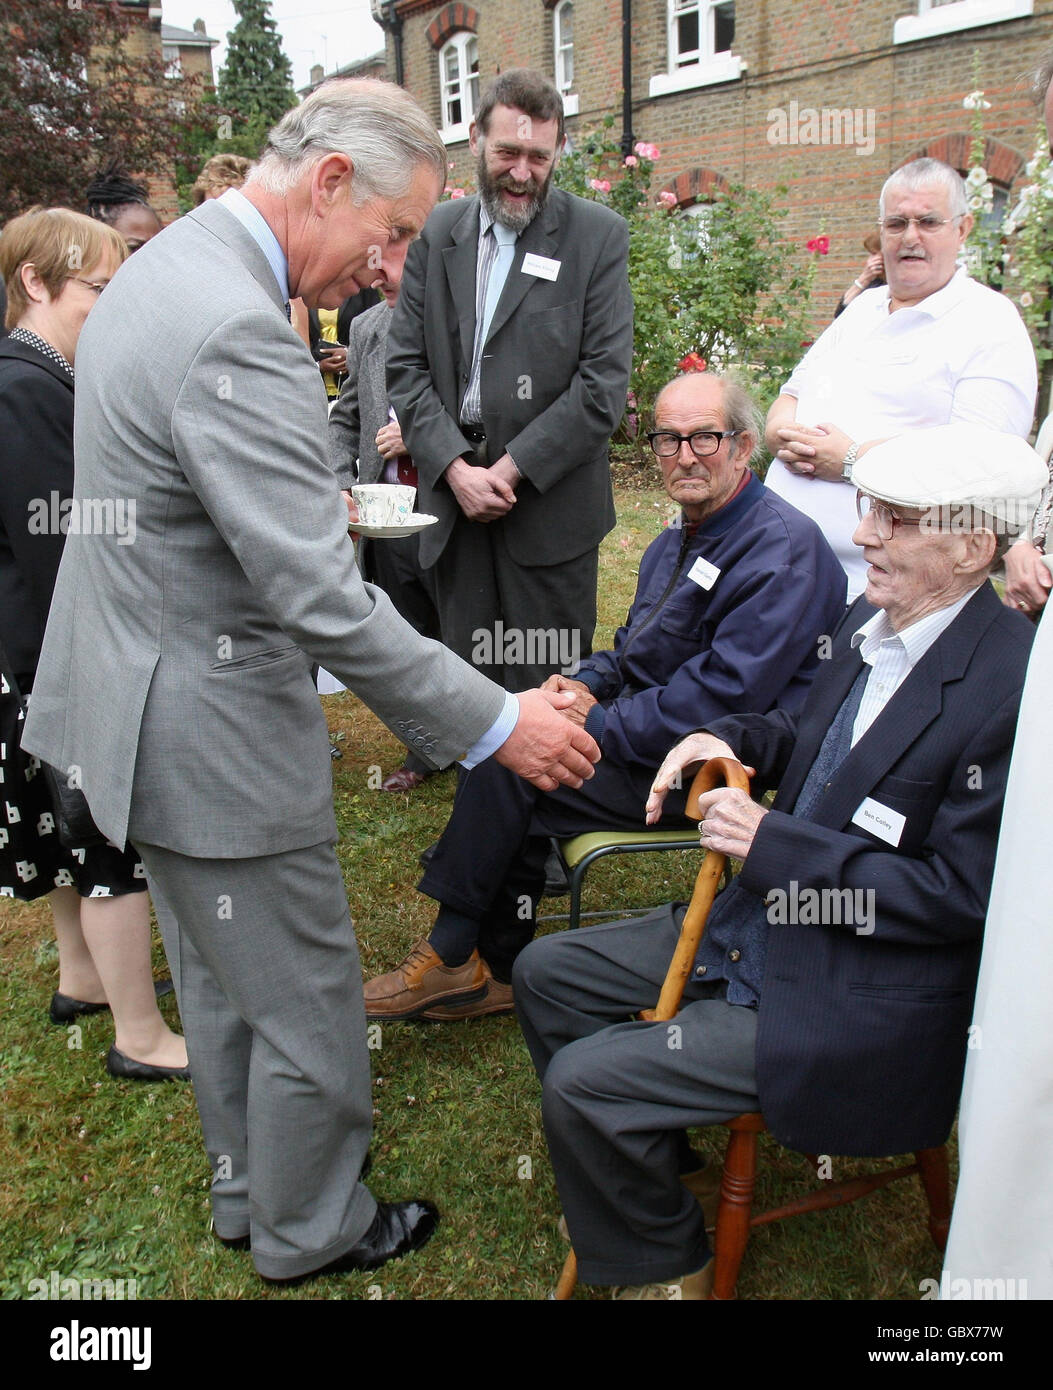 The Prince of Wales, centre, patron of the Almshouse Association, talks with residents, Harold Clarke, left and Ben Colley, right, during a visit to St Pancras almshouses in north London to celebrate the 150th anniversary of the Almshouses. Stock Photo